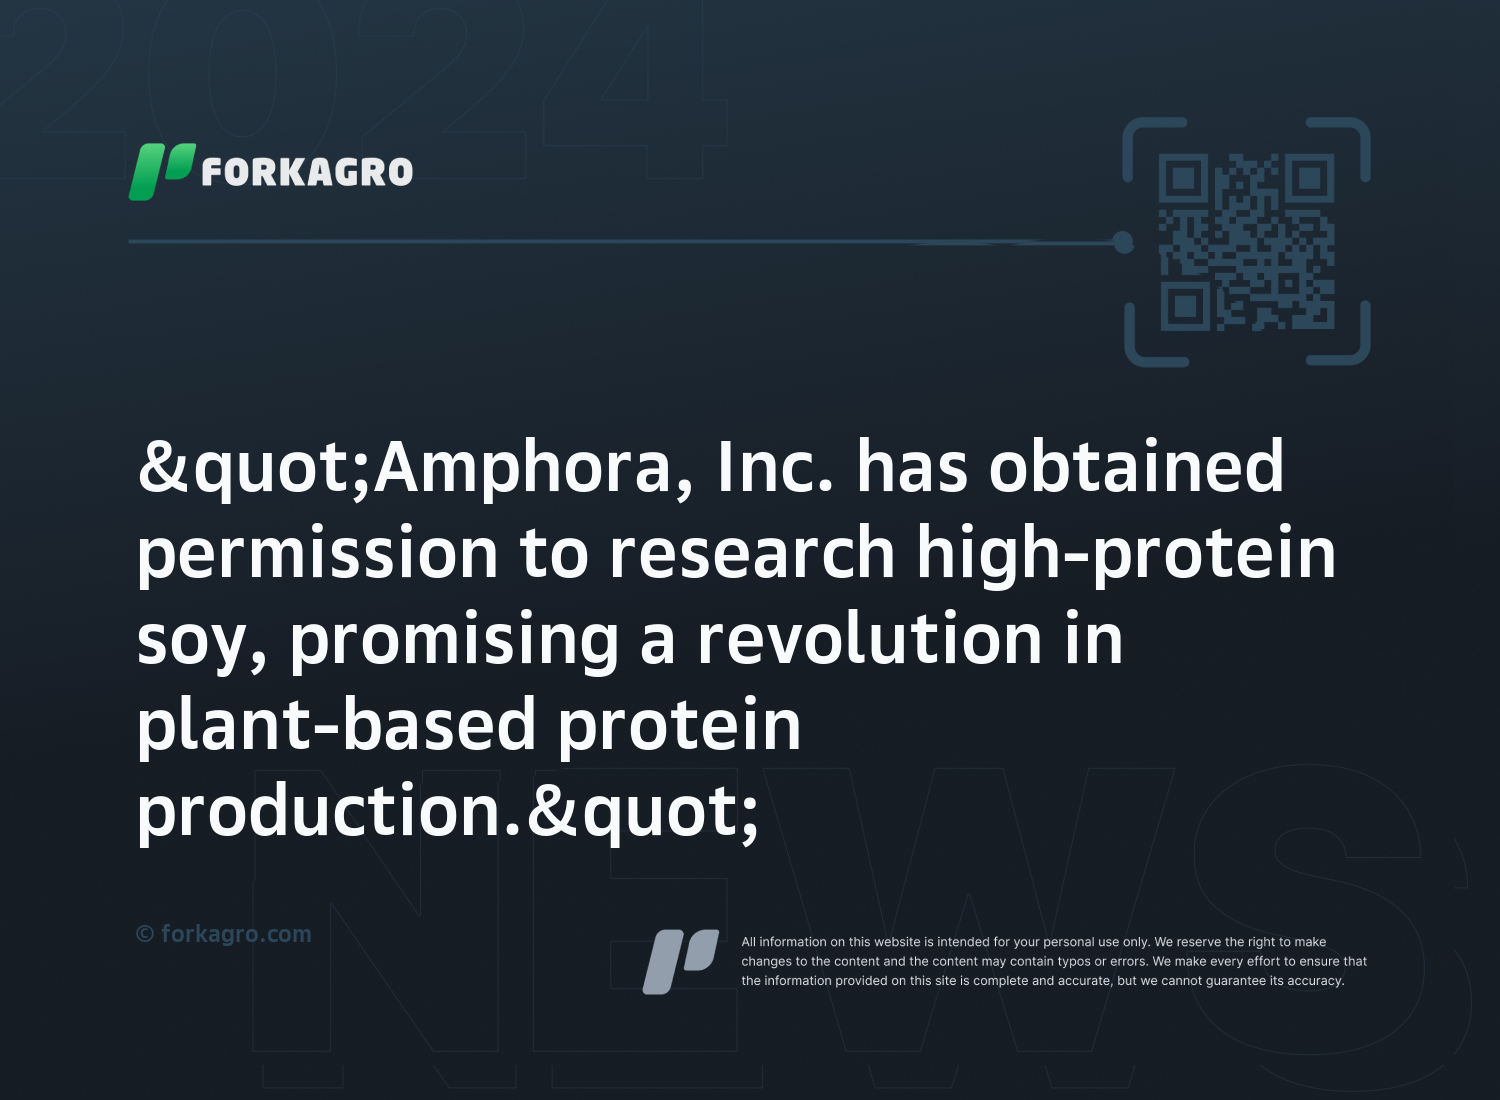 "Amphora, Inc. has obtained permission to research high-protein soy, promising a revolution in plant-based protein production."